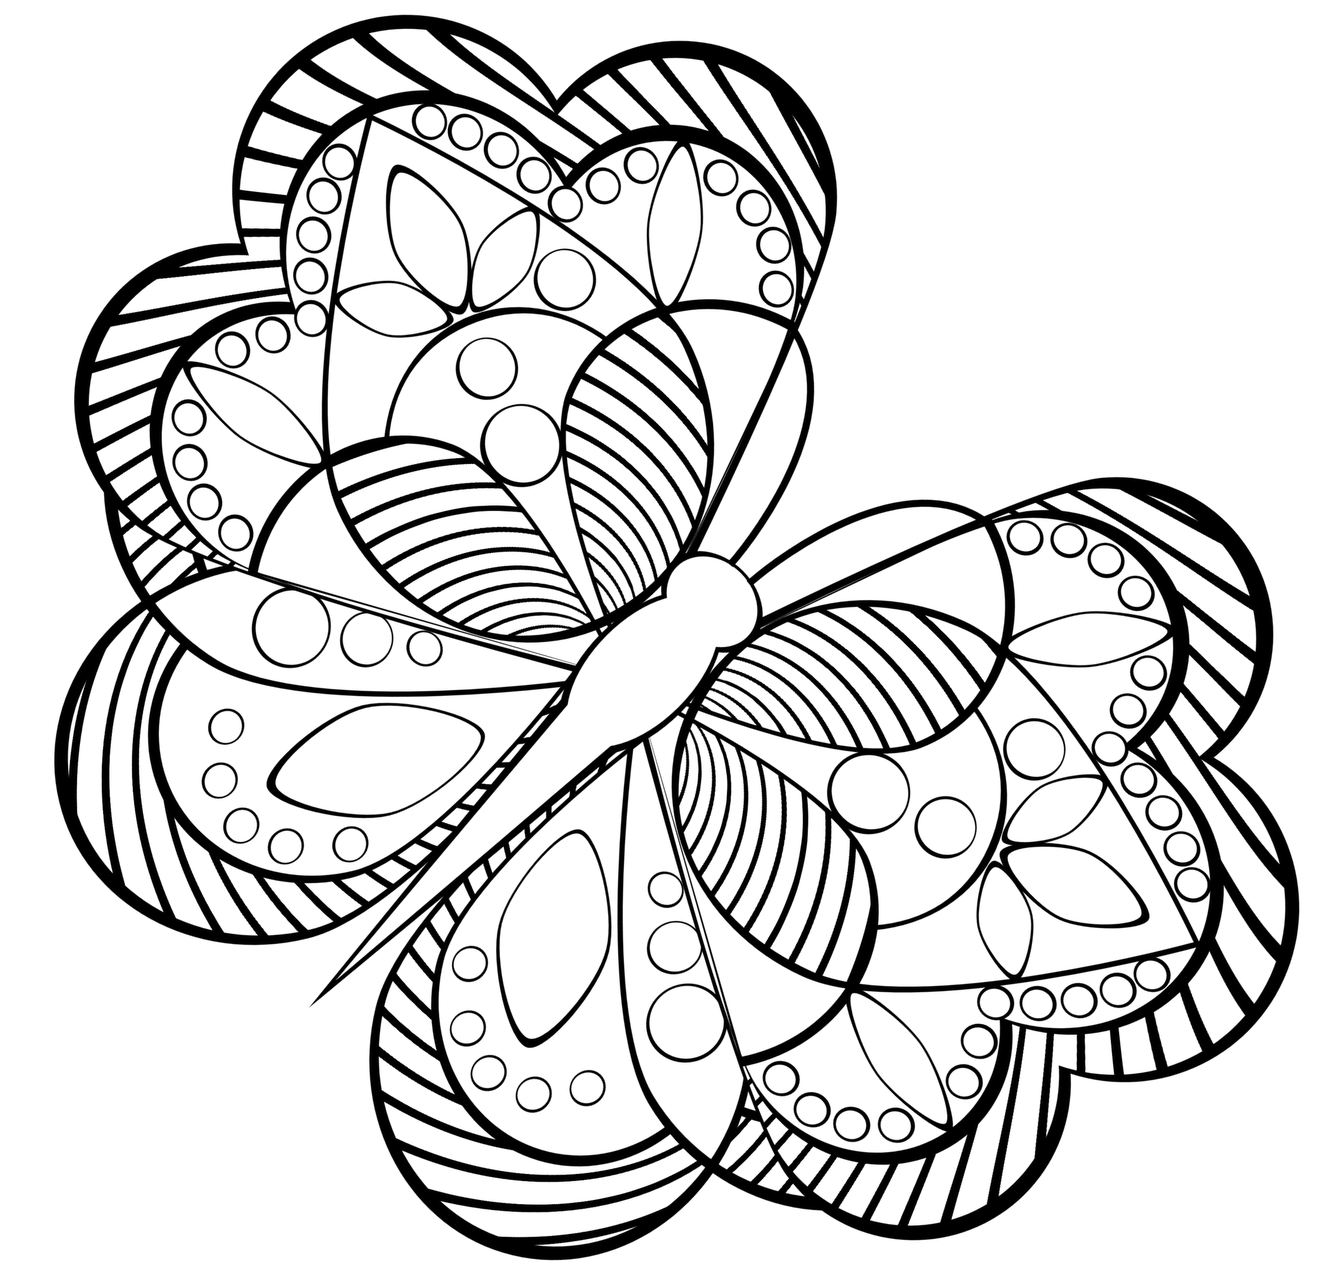 Advanced Coloring Pages | Free download on ClipArtMag